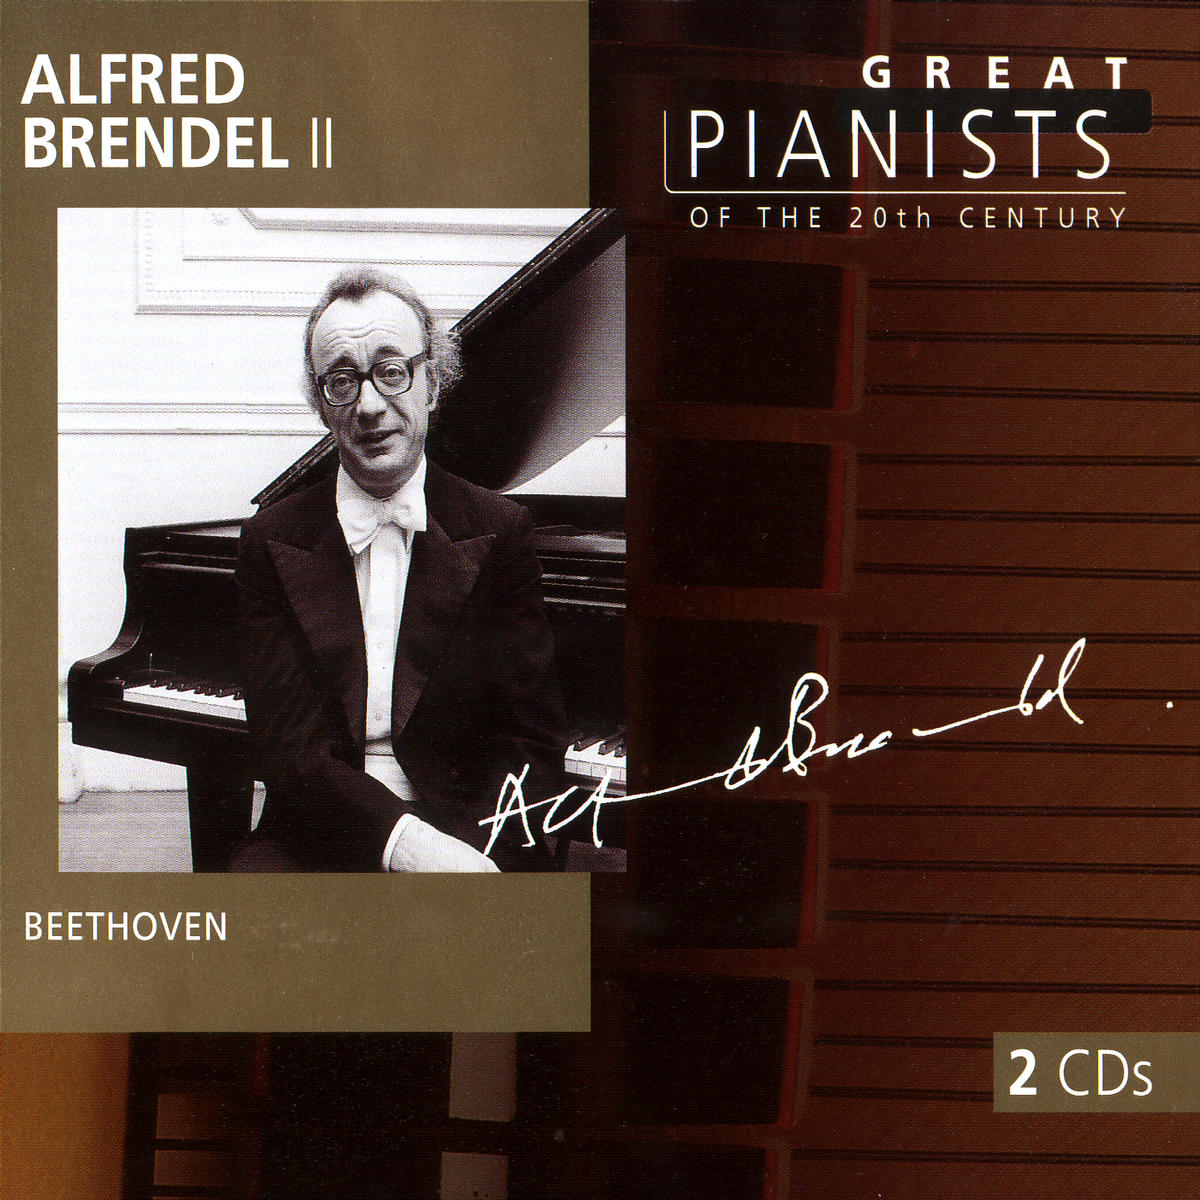 Produktfamilie | BEETHOVEN Great Pianists of the 20t